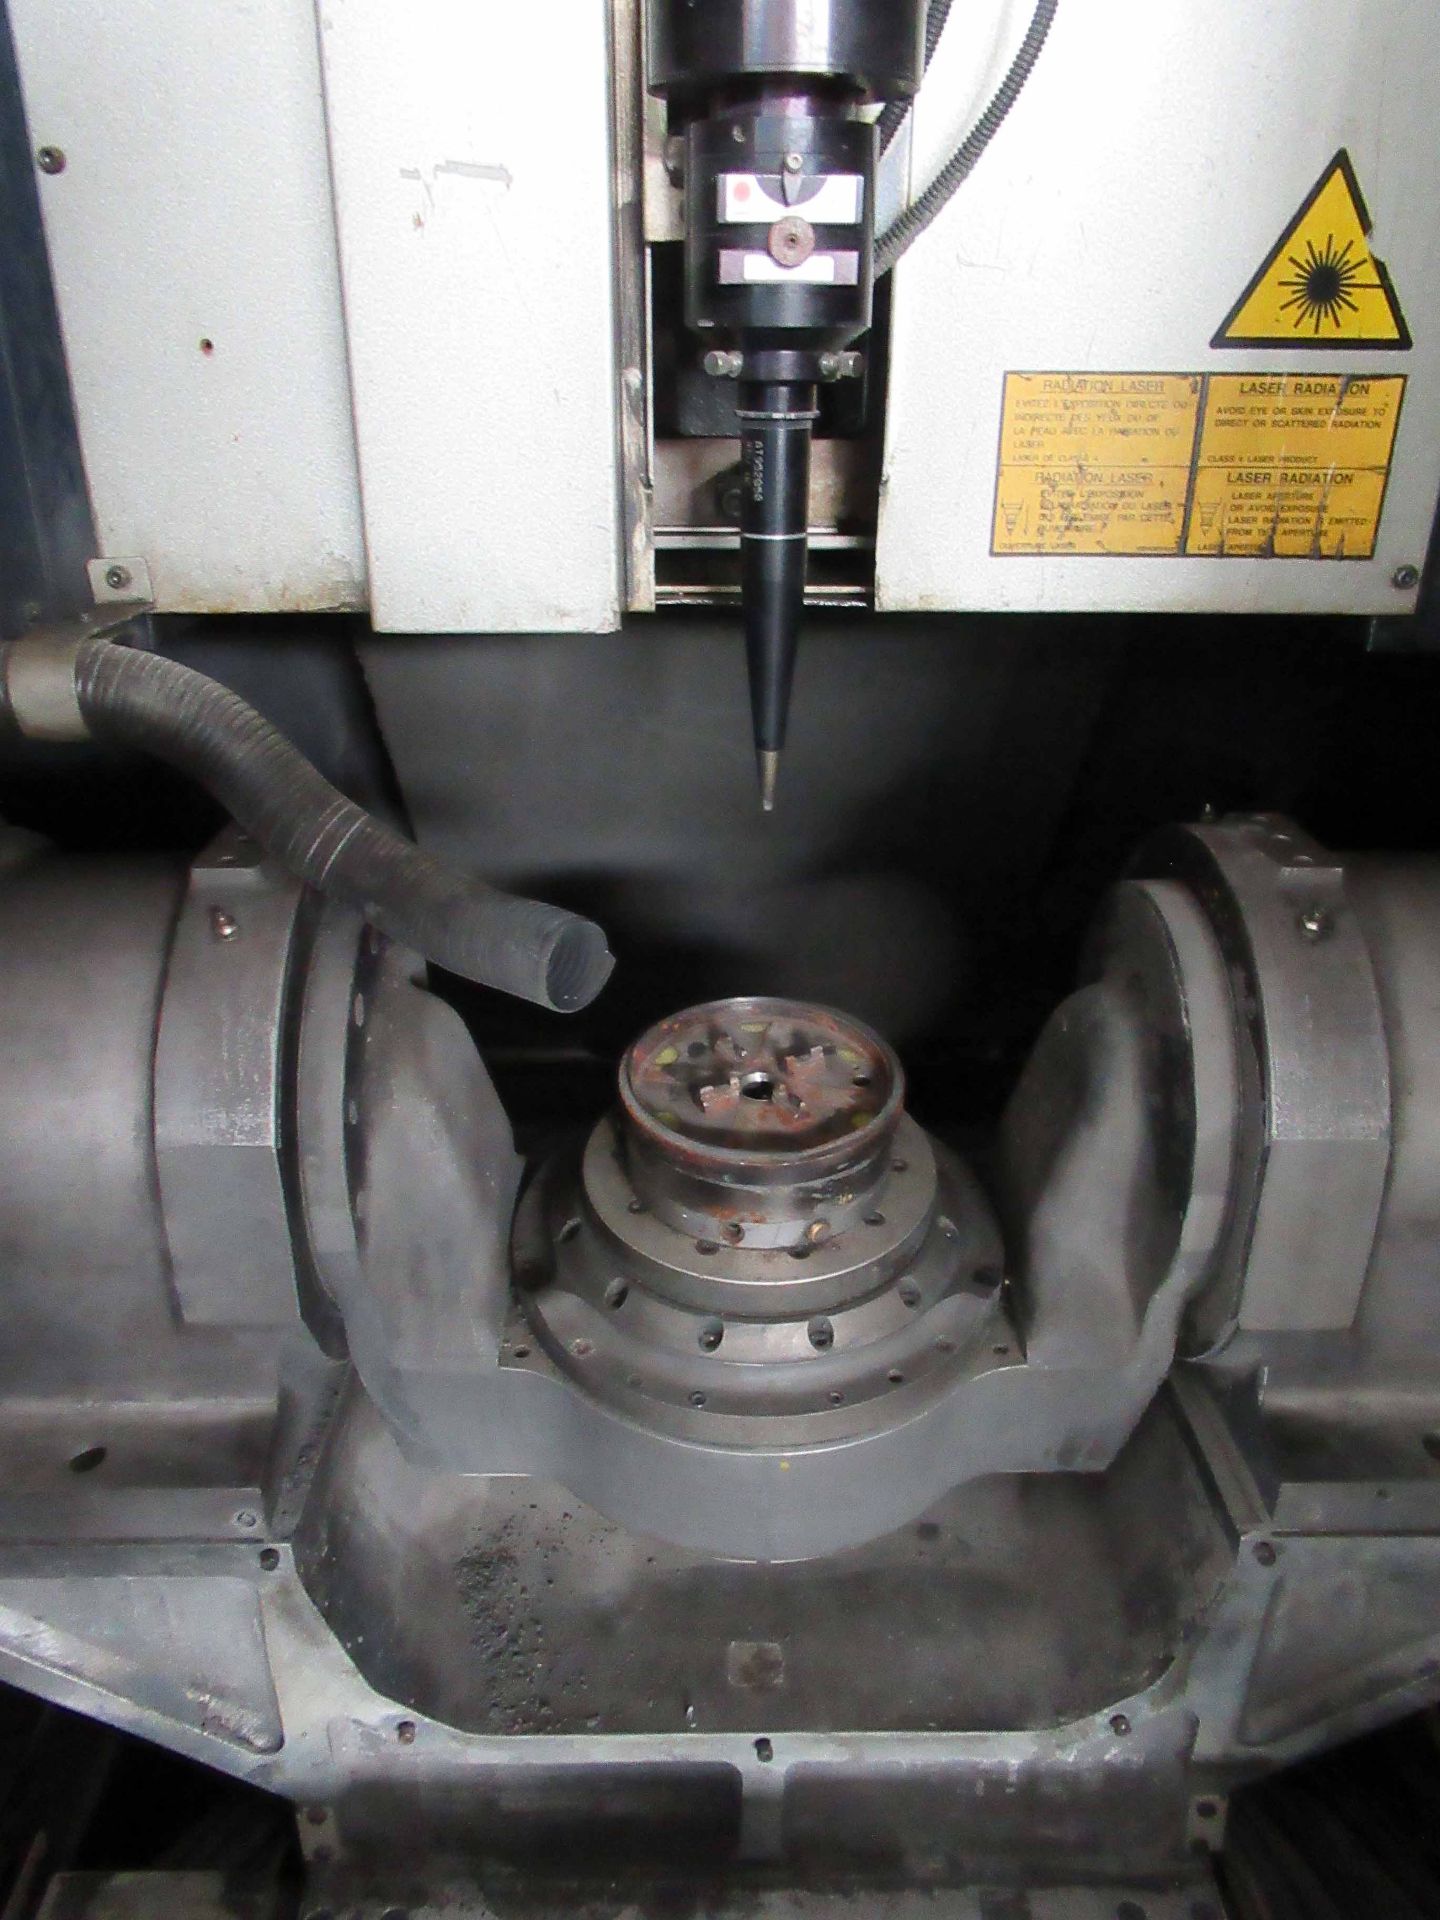 5-AXIS CNC LASER DRILLING MACHINE, MITSUI SEIKI MDL. VLD-300, new 2008, Fanuc series 310i- Mdl. A5 - Image 3 of 9